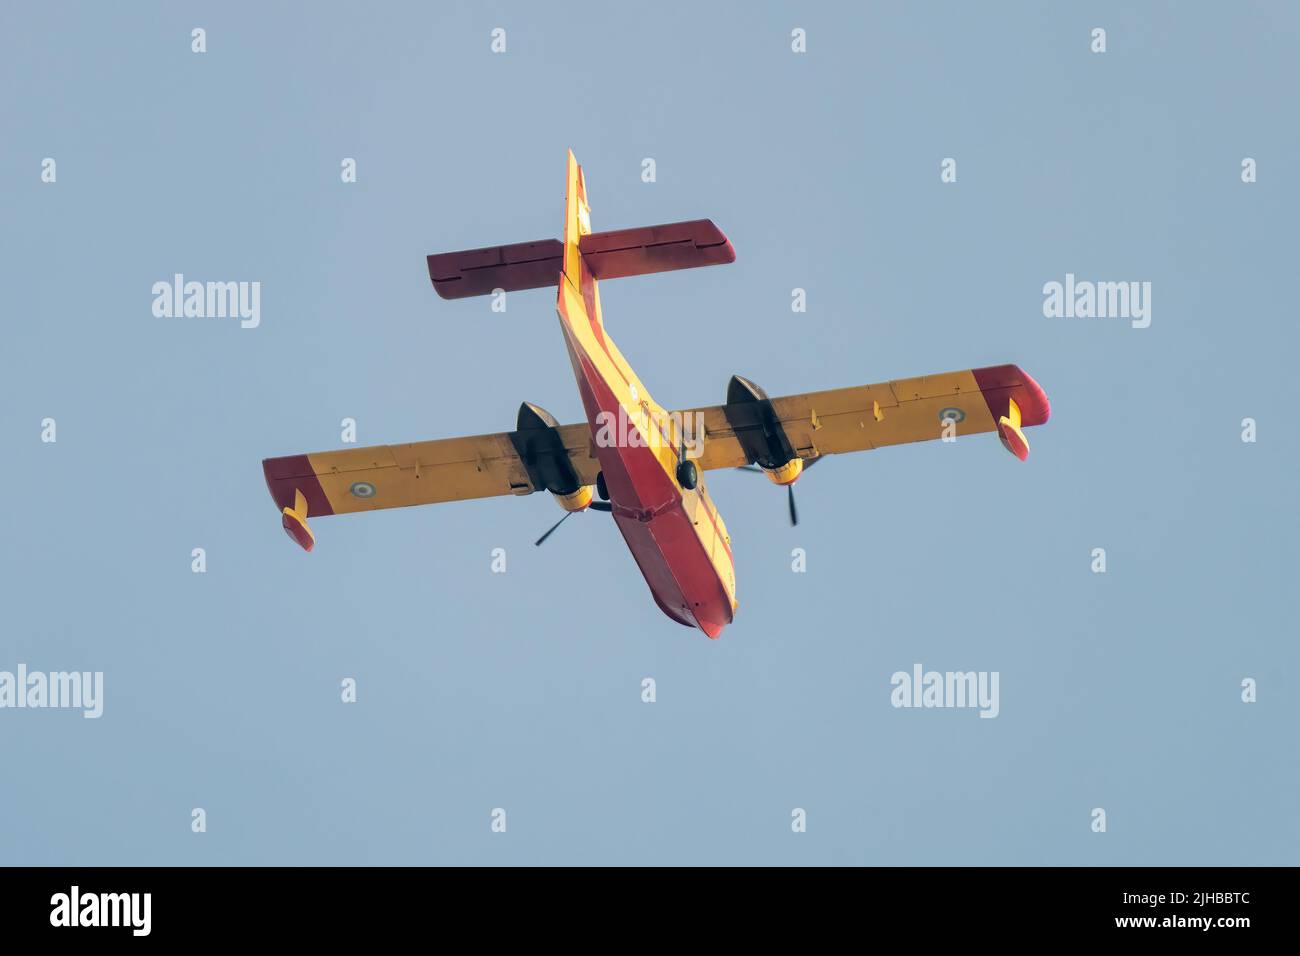 Loutraki, Greece 14 September 2019. Close up view of fire plane at the sky. Stock Photo